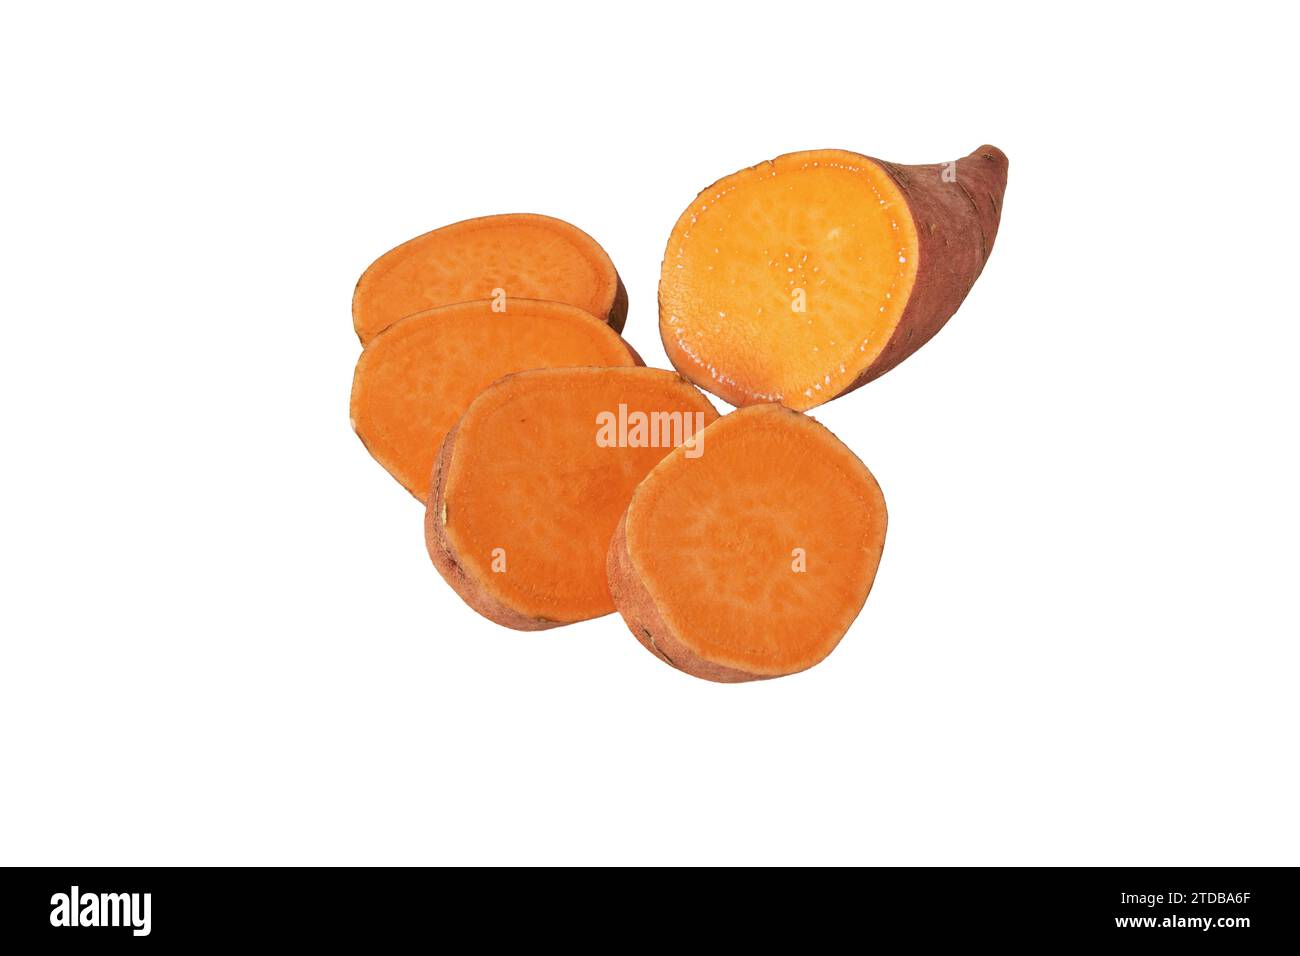 Sweet potato or boniato sliced tube with red skin and yellow flesh isolated on white. Vegetable food staple. Stock Photo